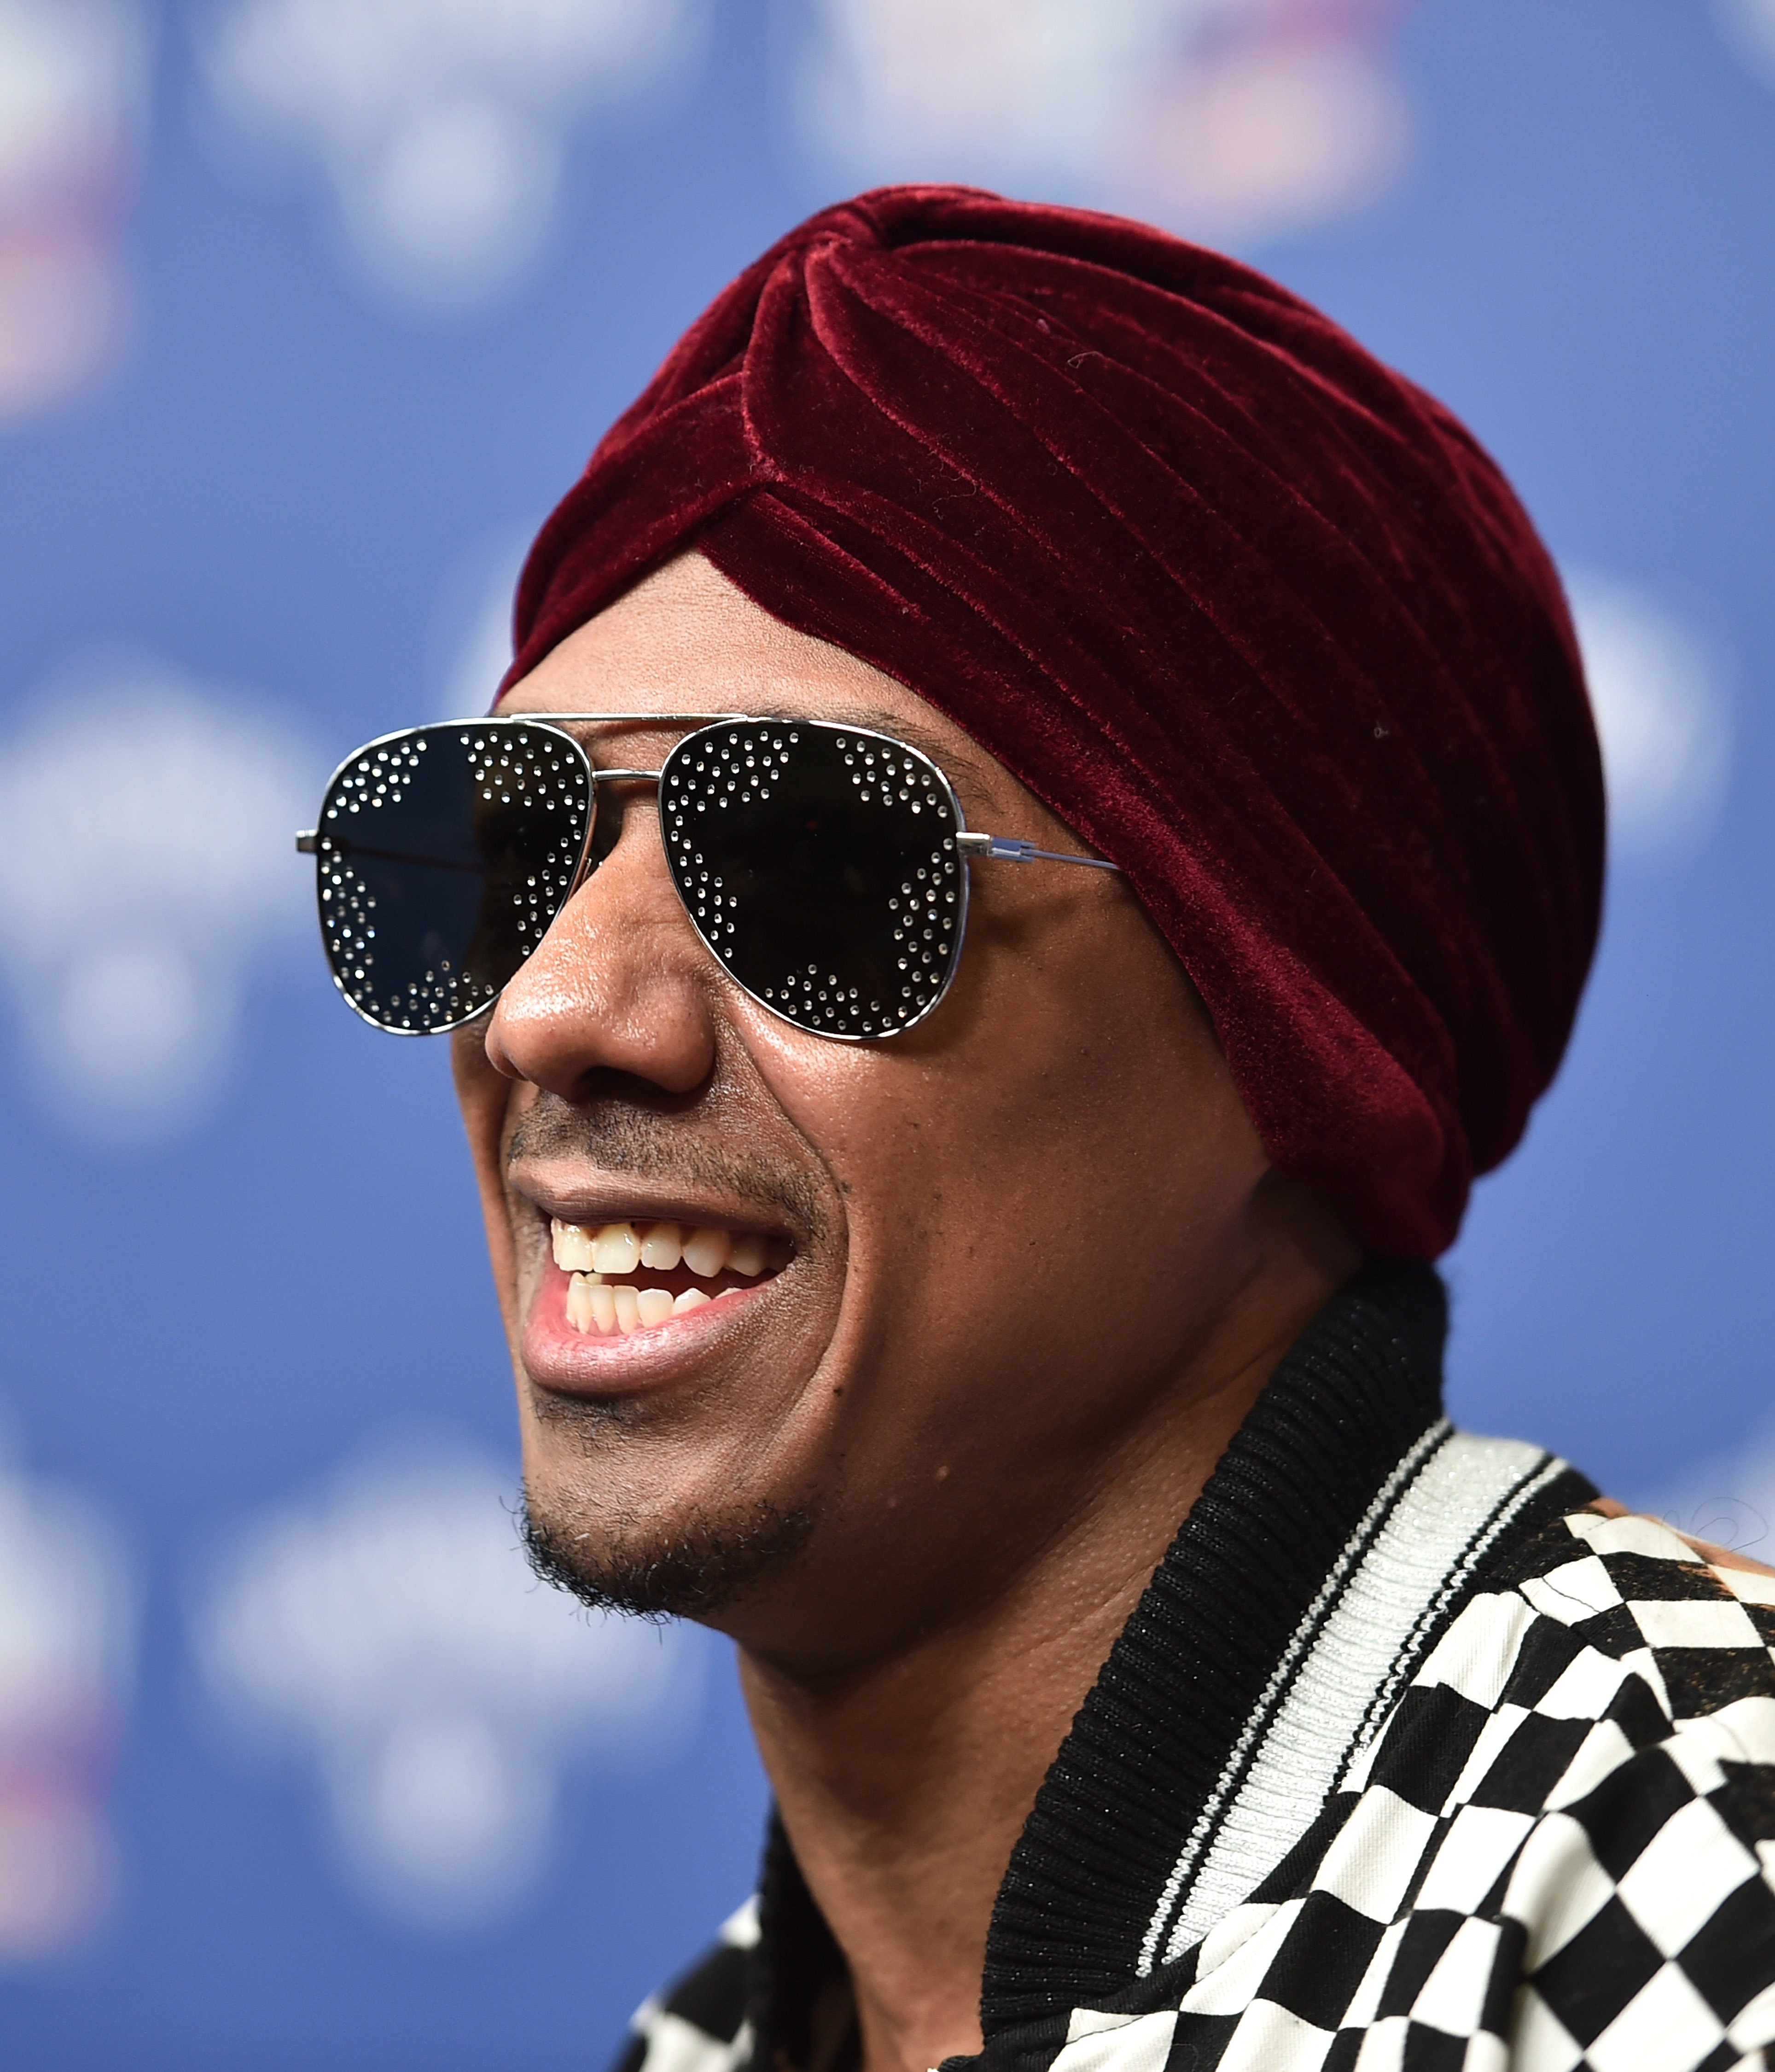 Nick Cannon poses at the NBA All-Star Celebrity Game 2018 on February 16, 2018 in Los Angeles, California. | Source: Getty Images